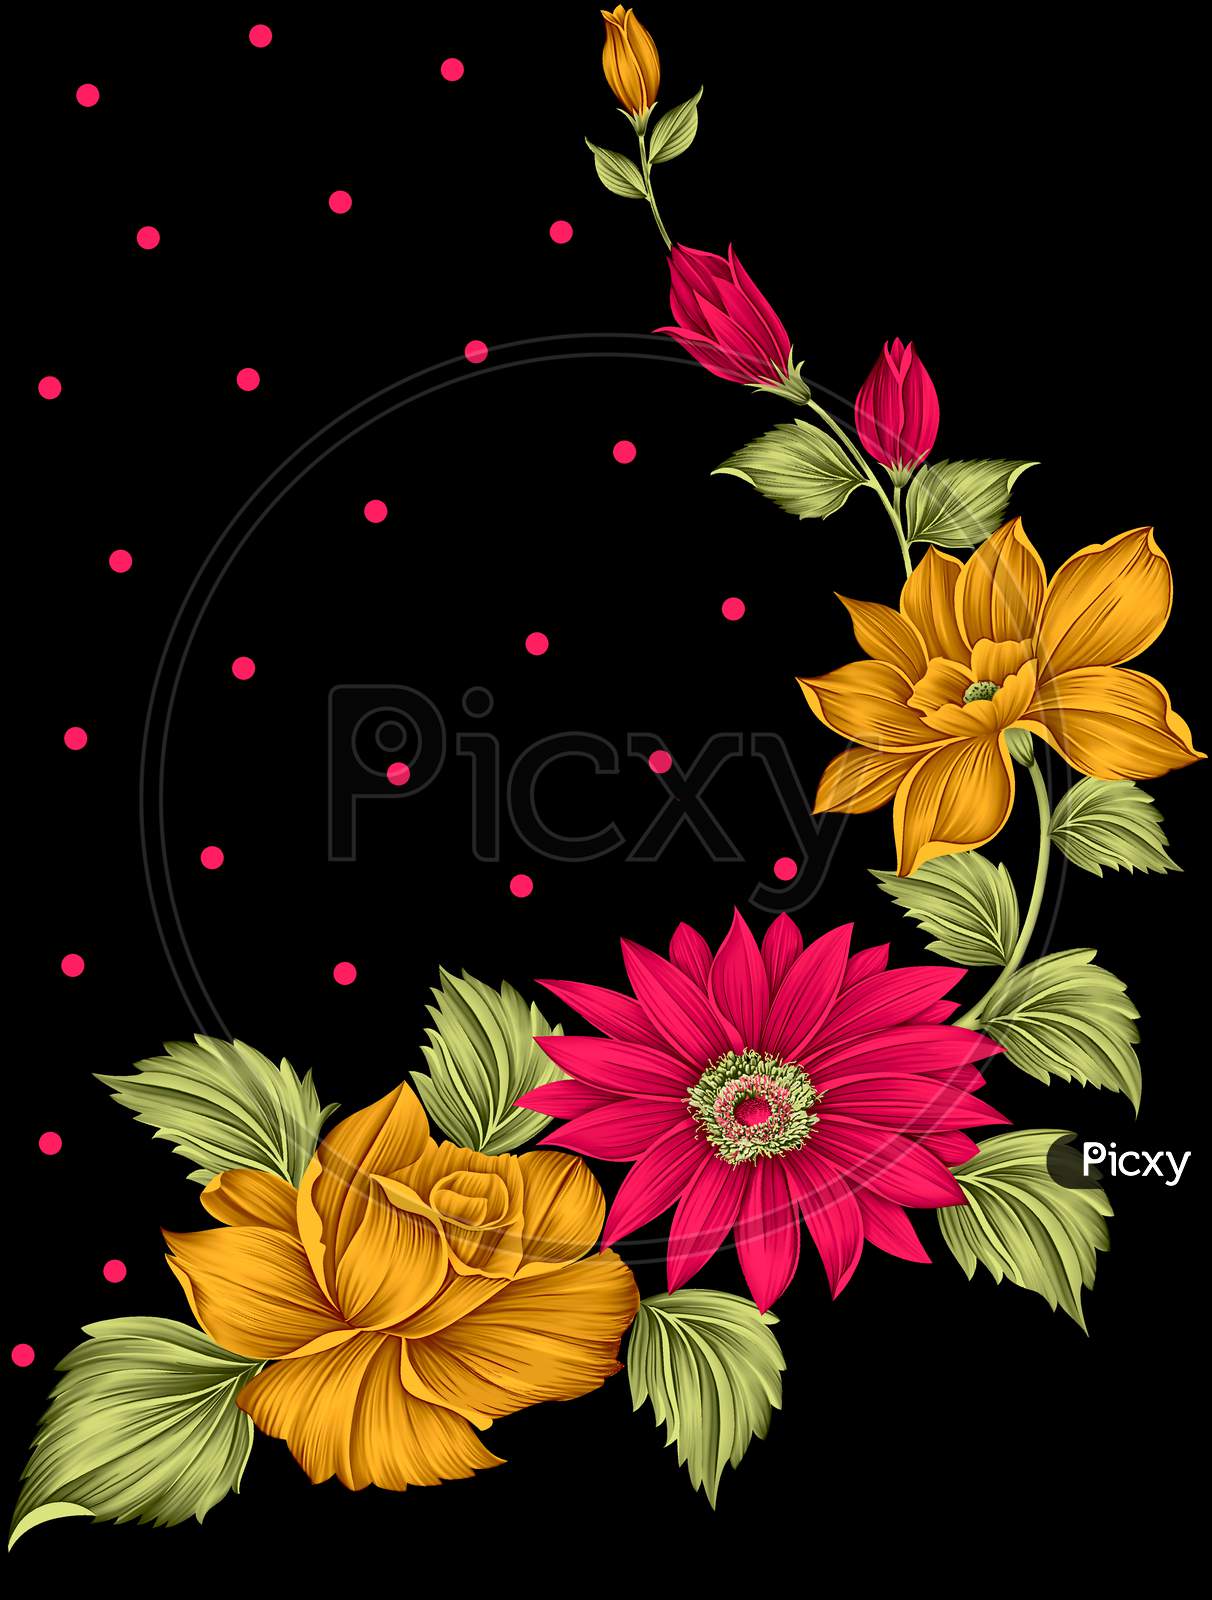 Digital Textile Design Flowers And Leaves With Black Background